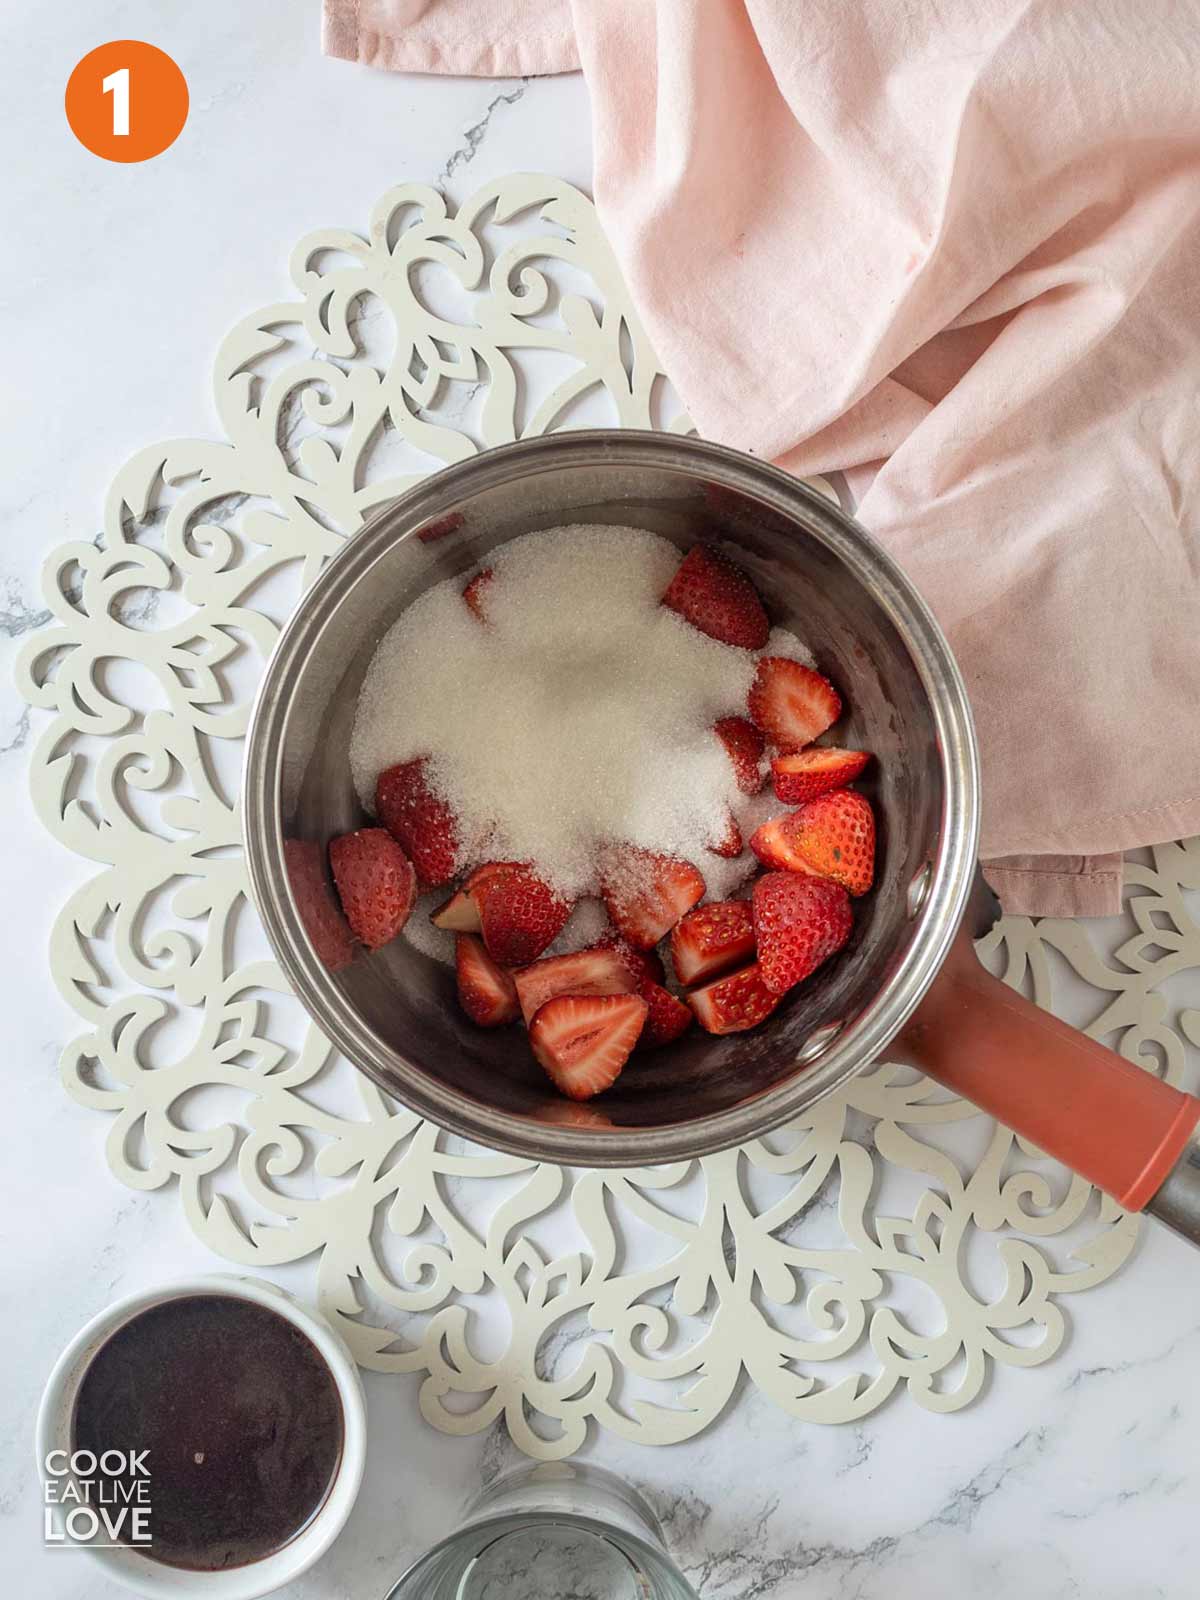 Strawberry in a pot with sugar added and the acai in the bowl next to it.